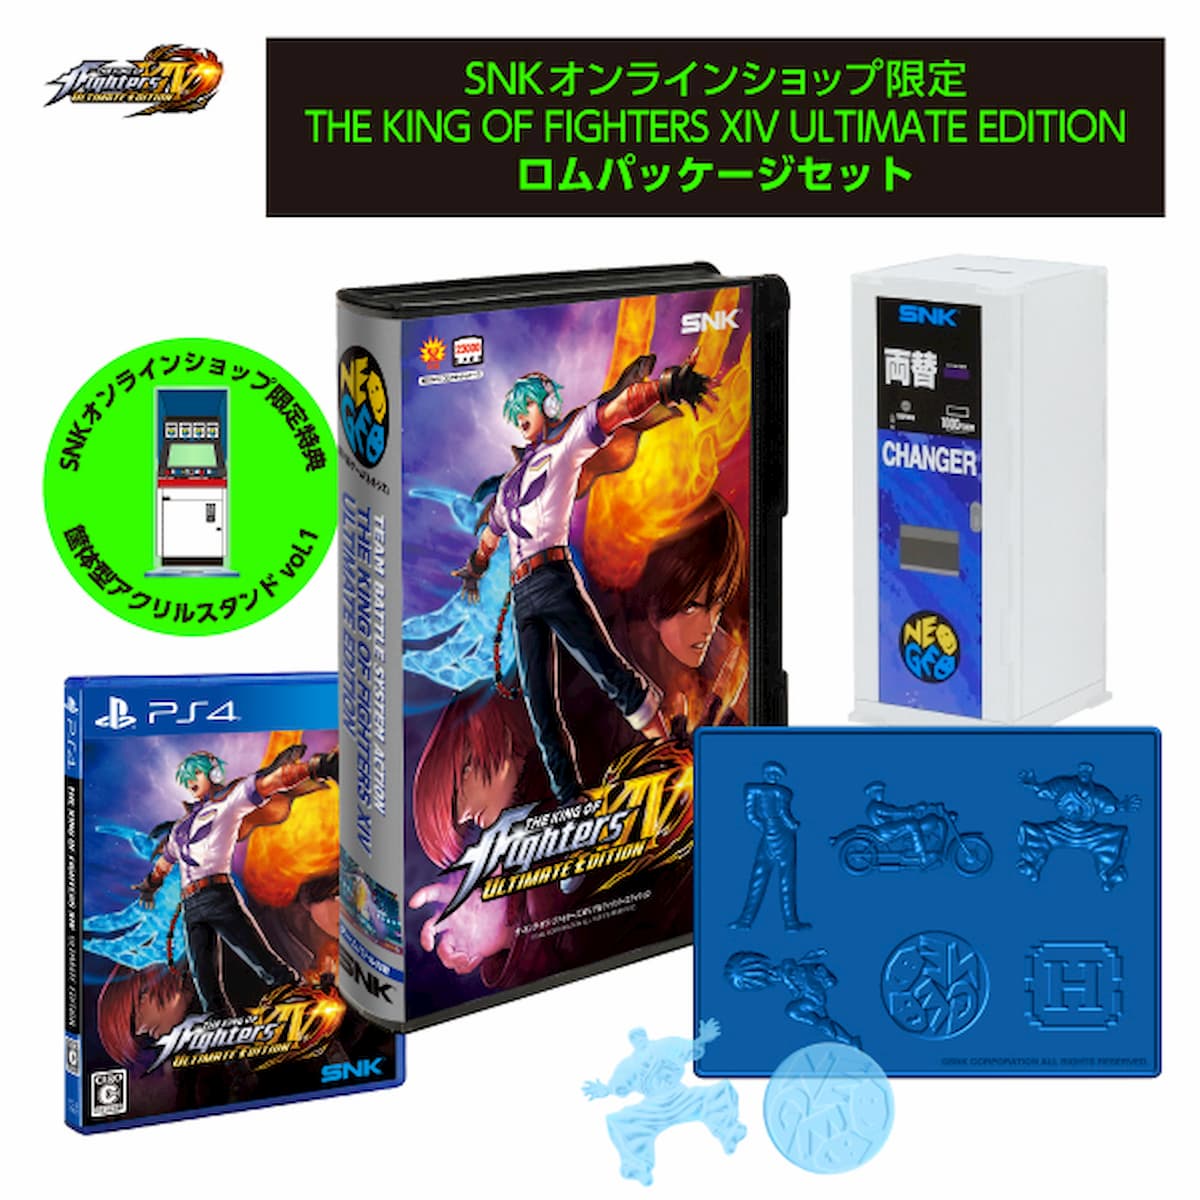 THE KING OF FIGHTERS XIV ULTIMATE EDITION Rom Package Set --PS4